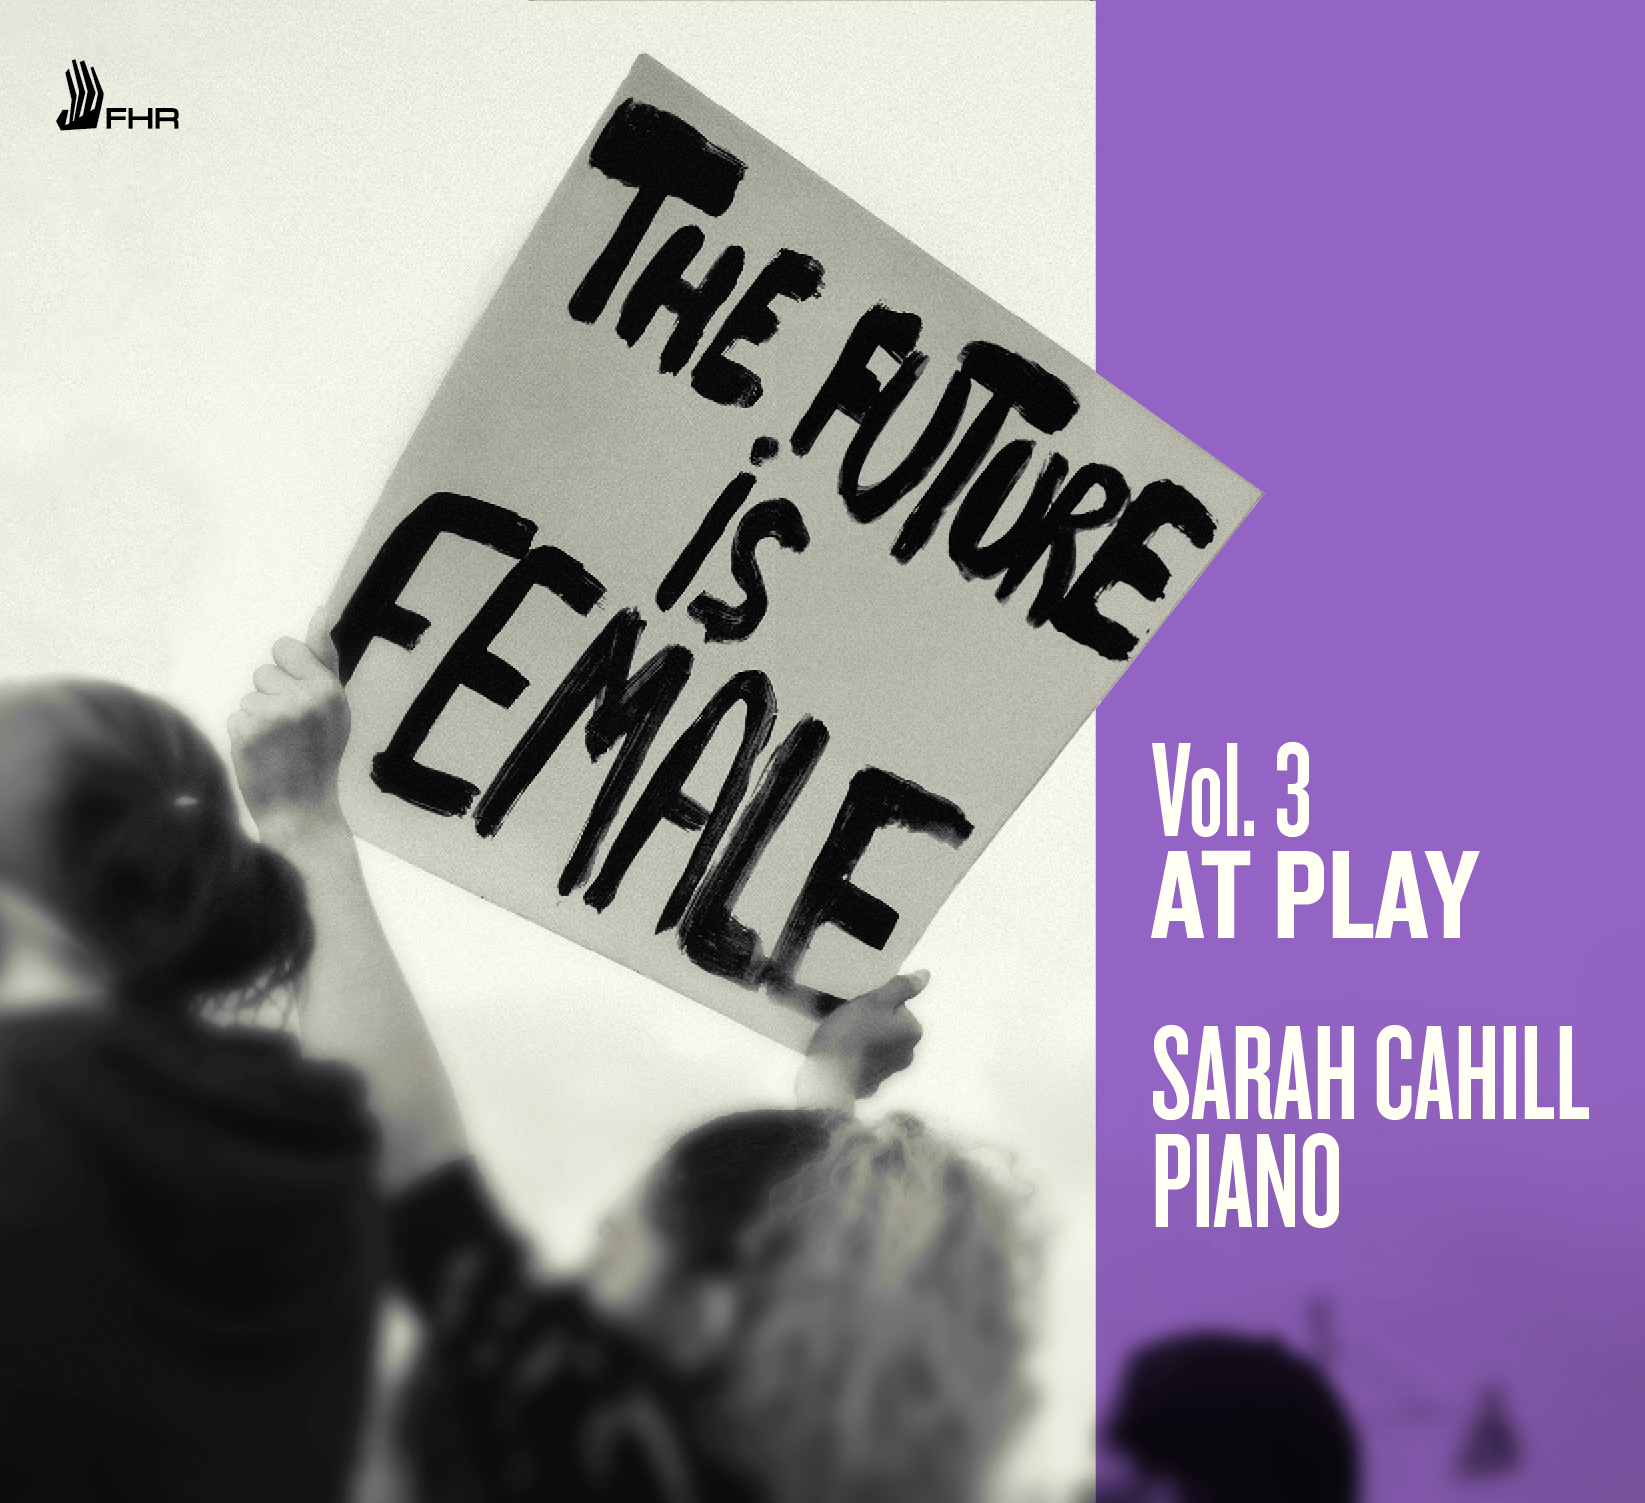 Review of Sarah Cahill: The Future is Female Vol 3